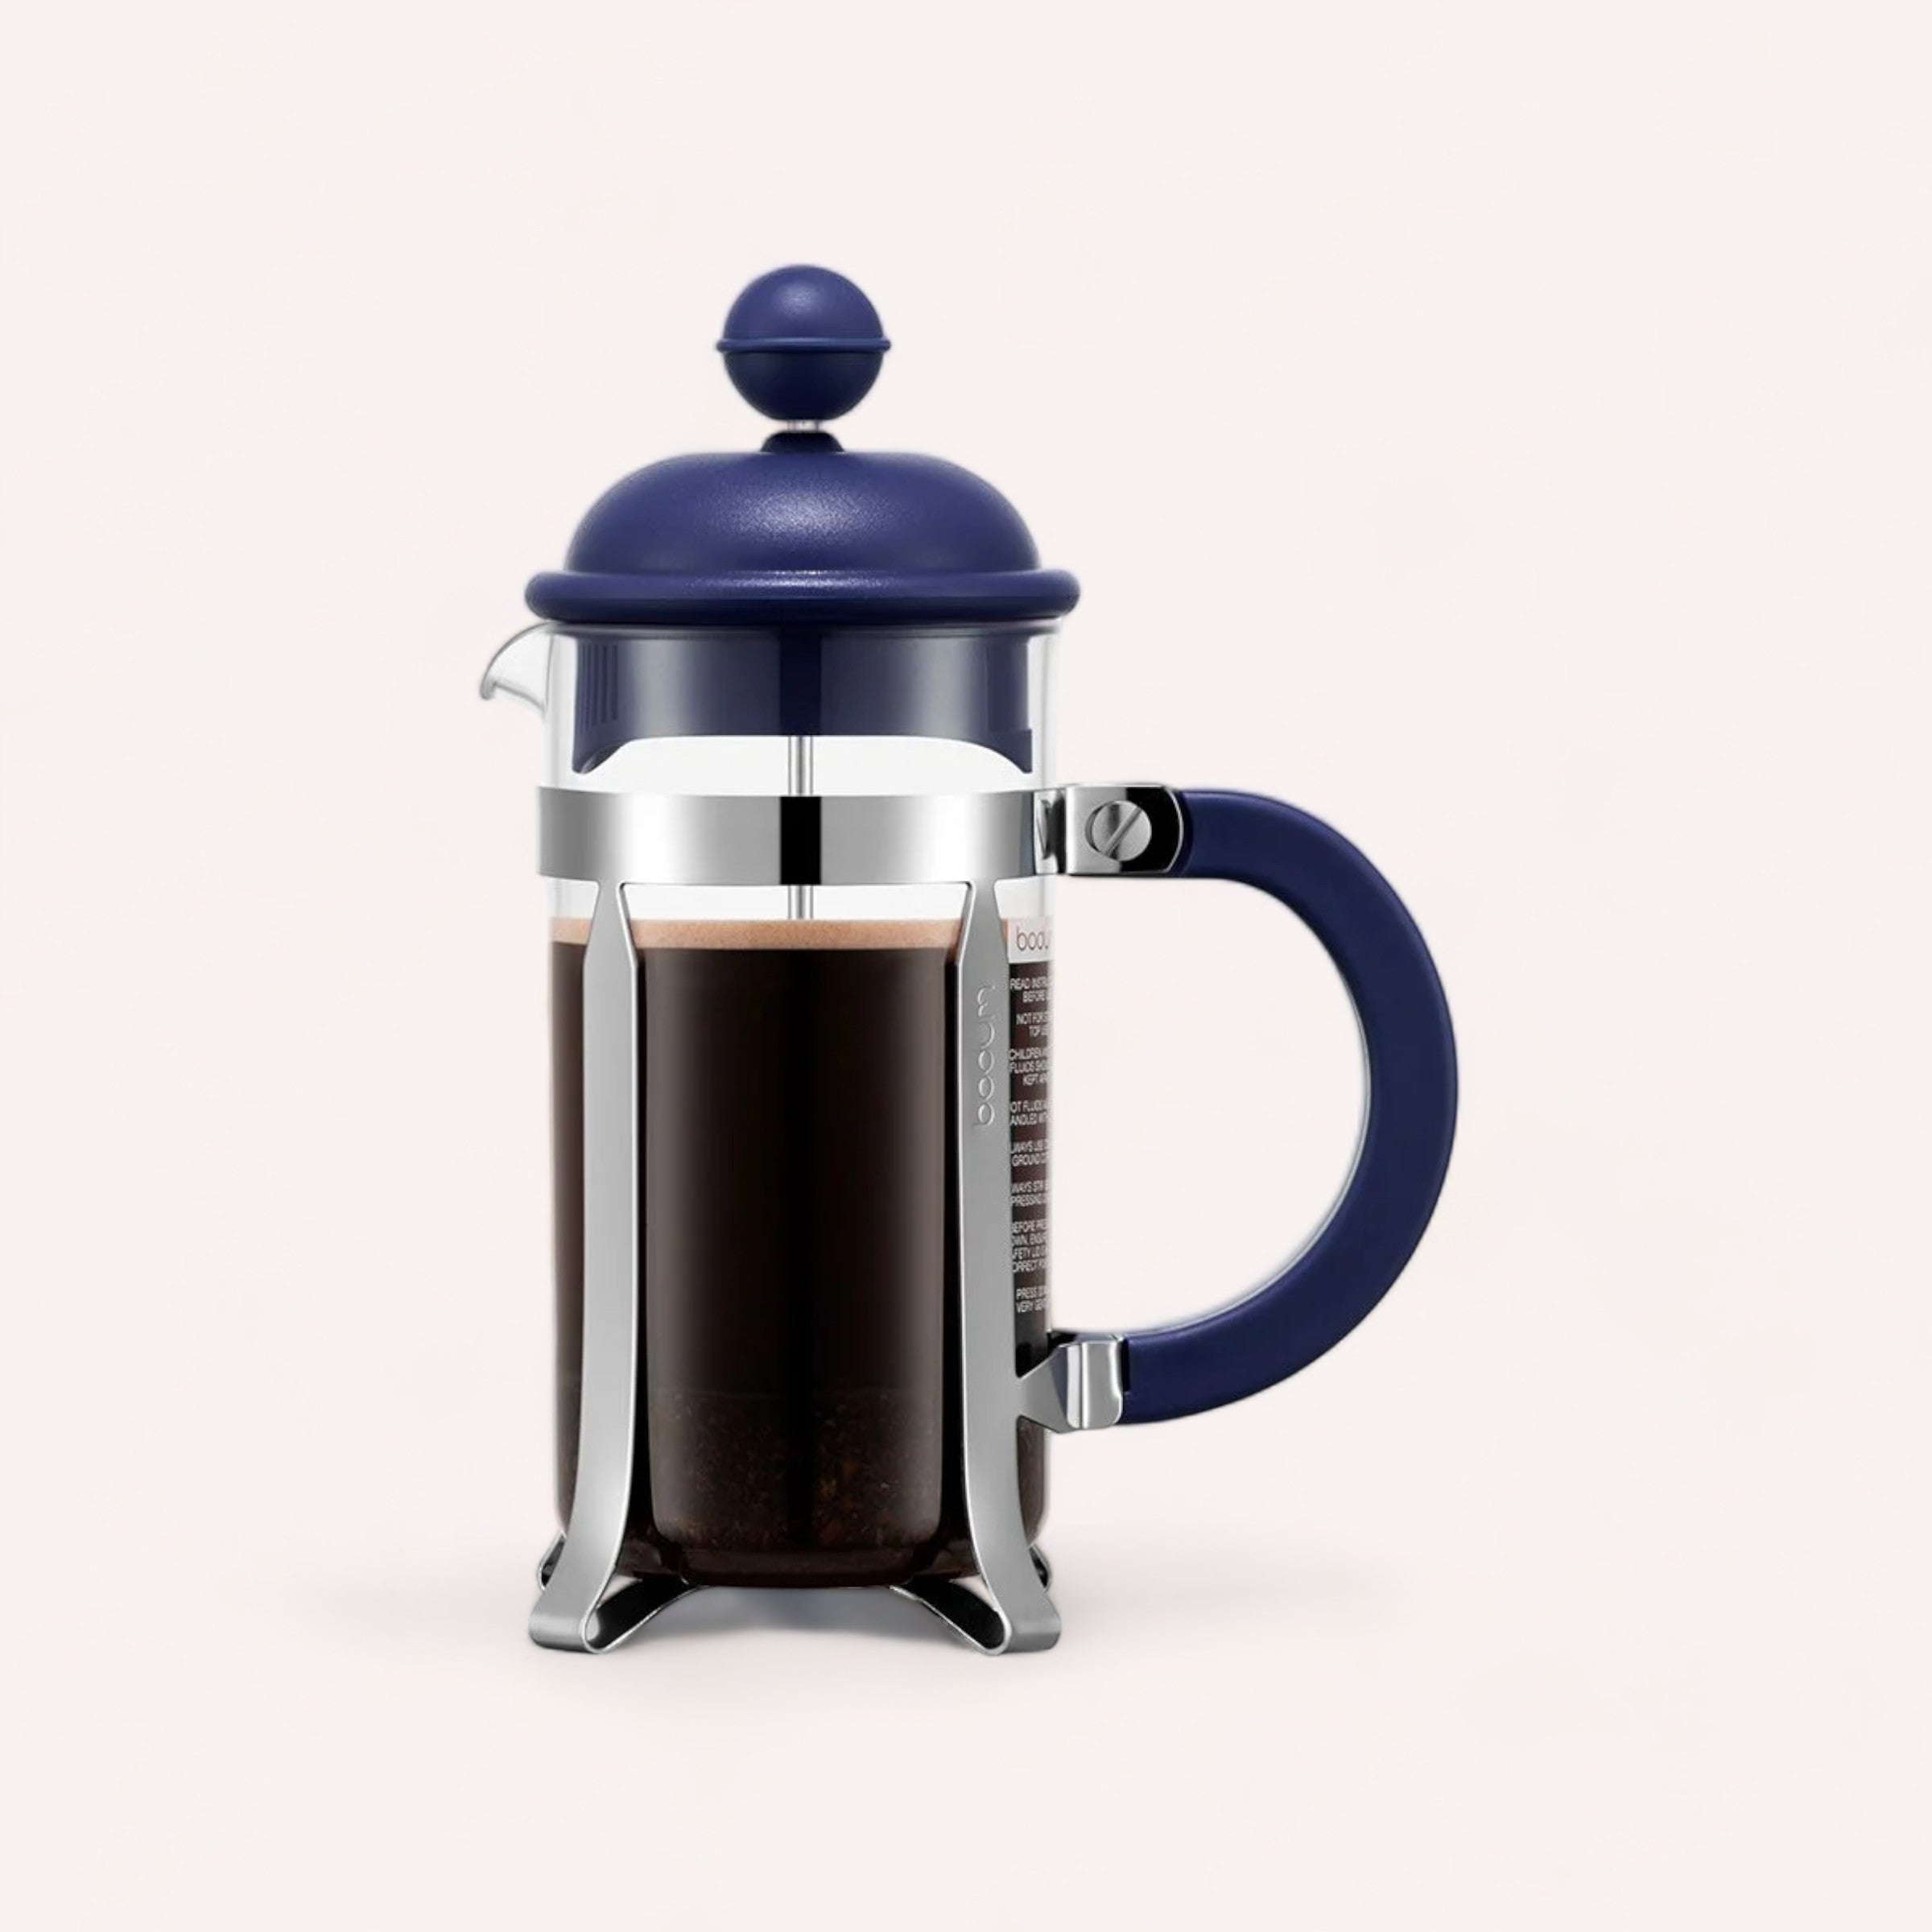 A sleek french press with freshly brewed giftbox co. Coffee, featuring a deep blue lid and handle, against a neutral background.